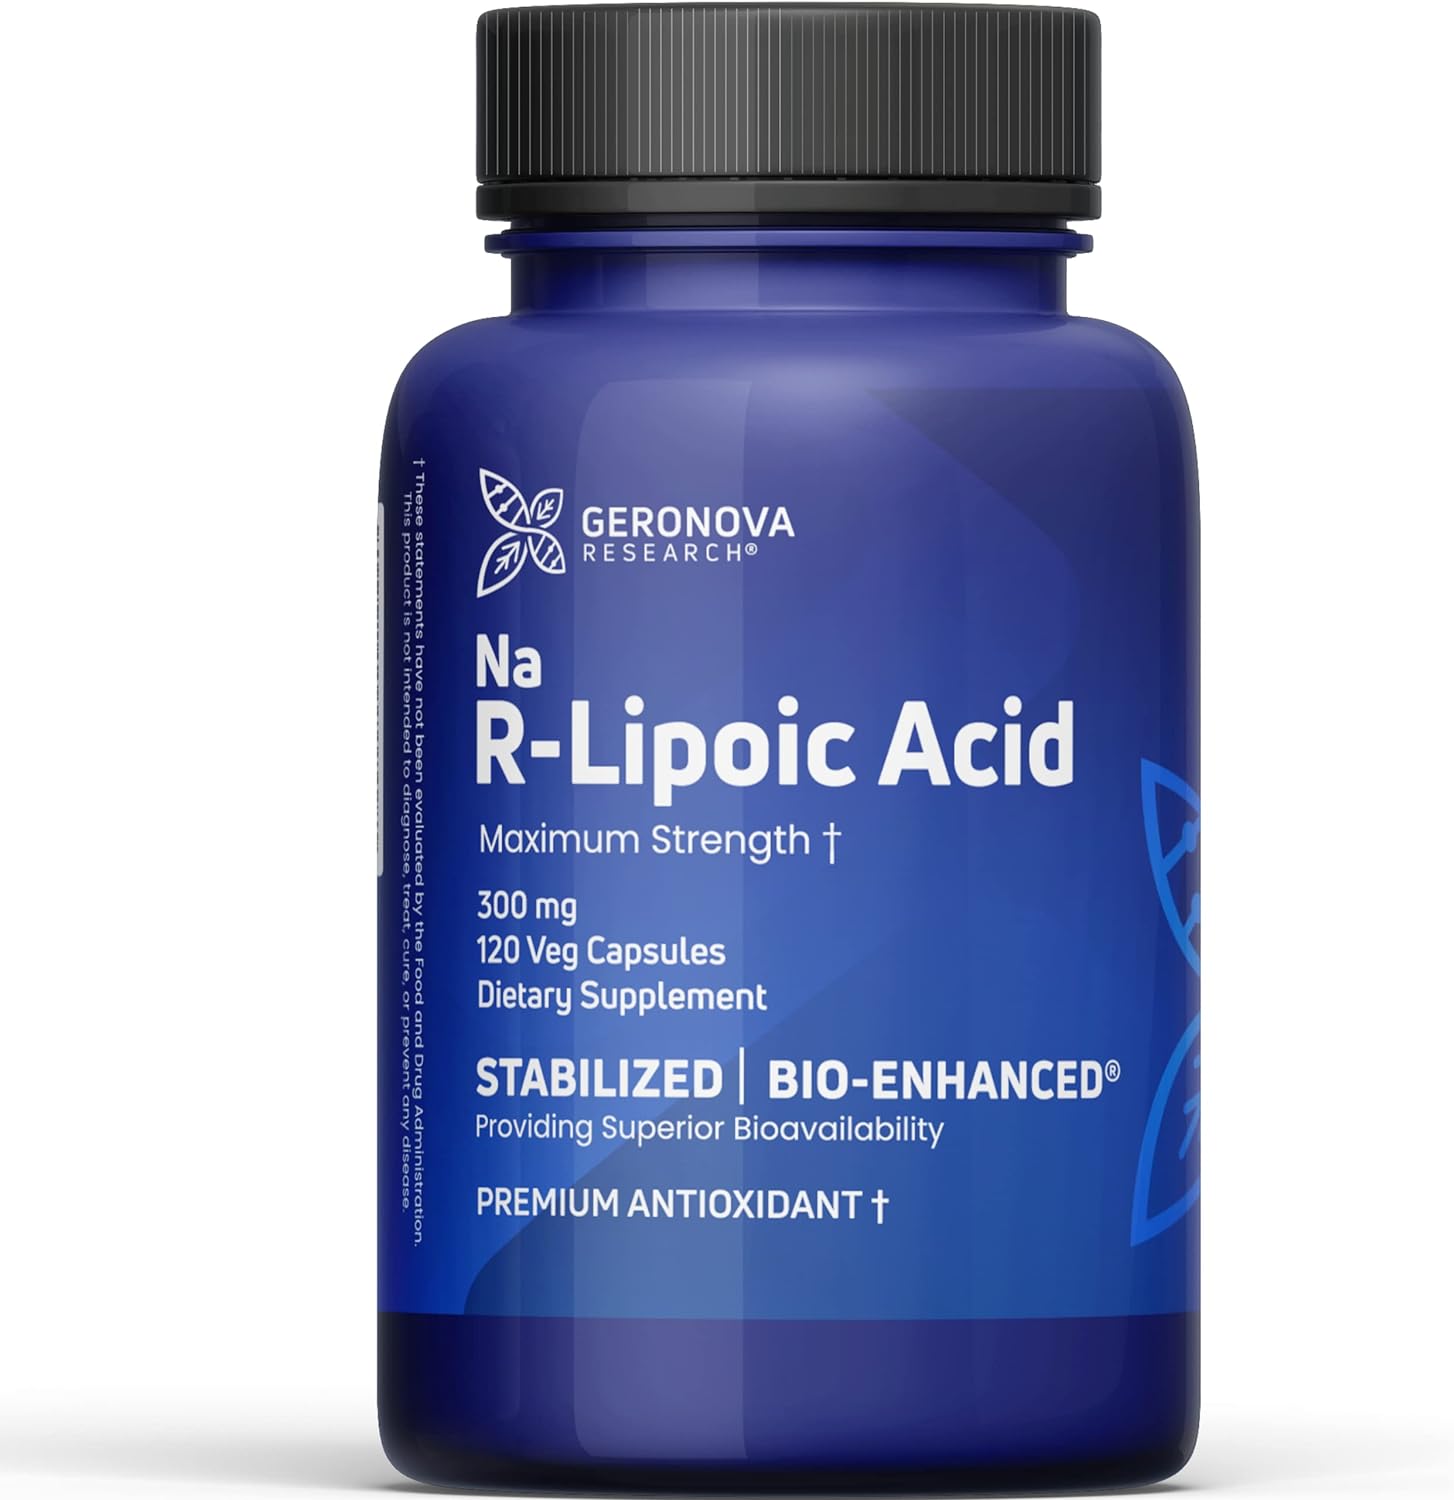 GeroNova Research R-Lipoic Acid 300mg 120 Caps - Stabilized R-Alpha Lipoic Acid With Superior Bioavailability, Metabolic Activity & Healthy Aging Support - Gluten Free & Non-GMO Antioxidant Supplement